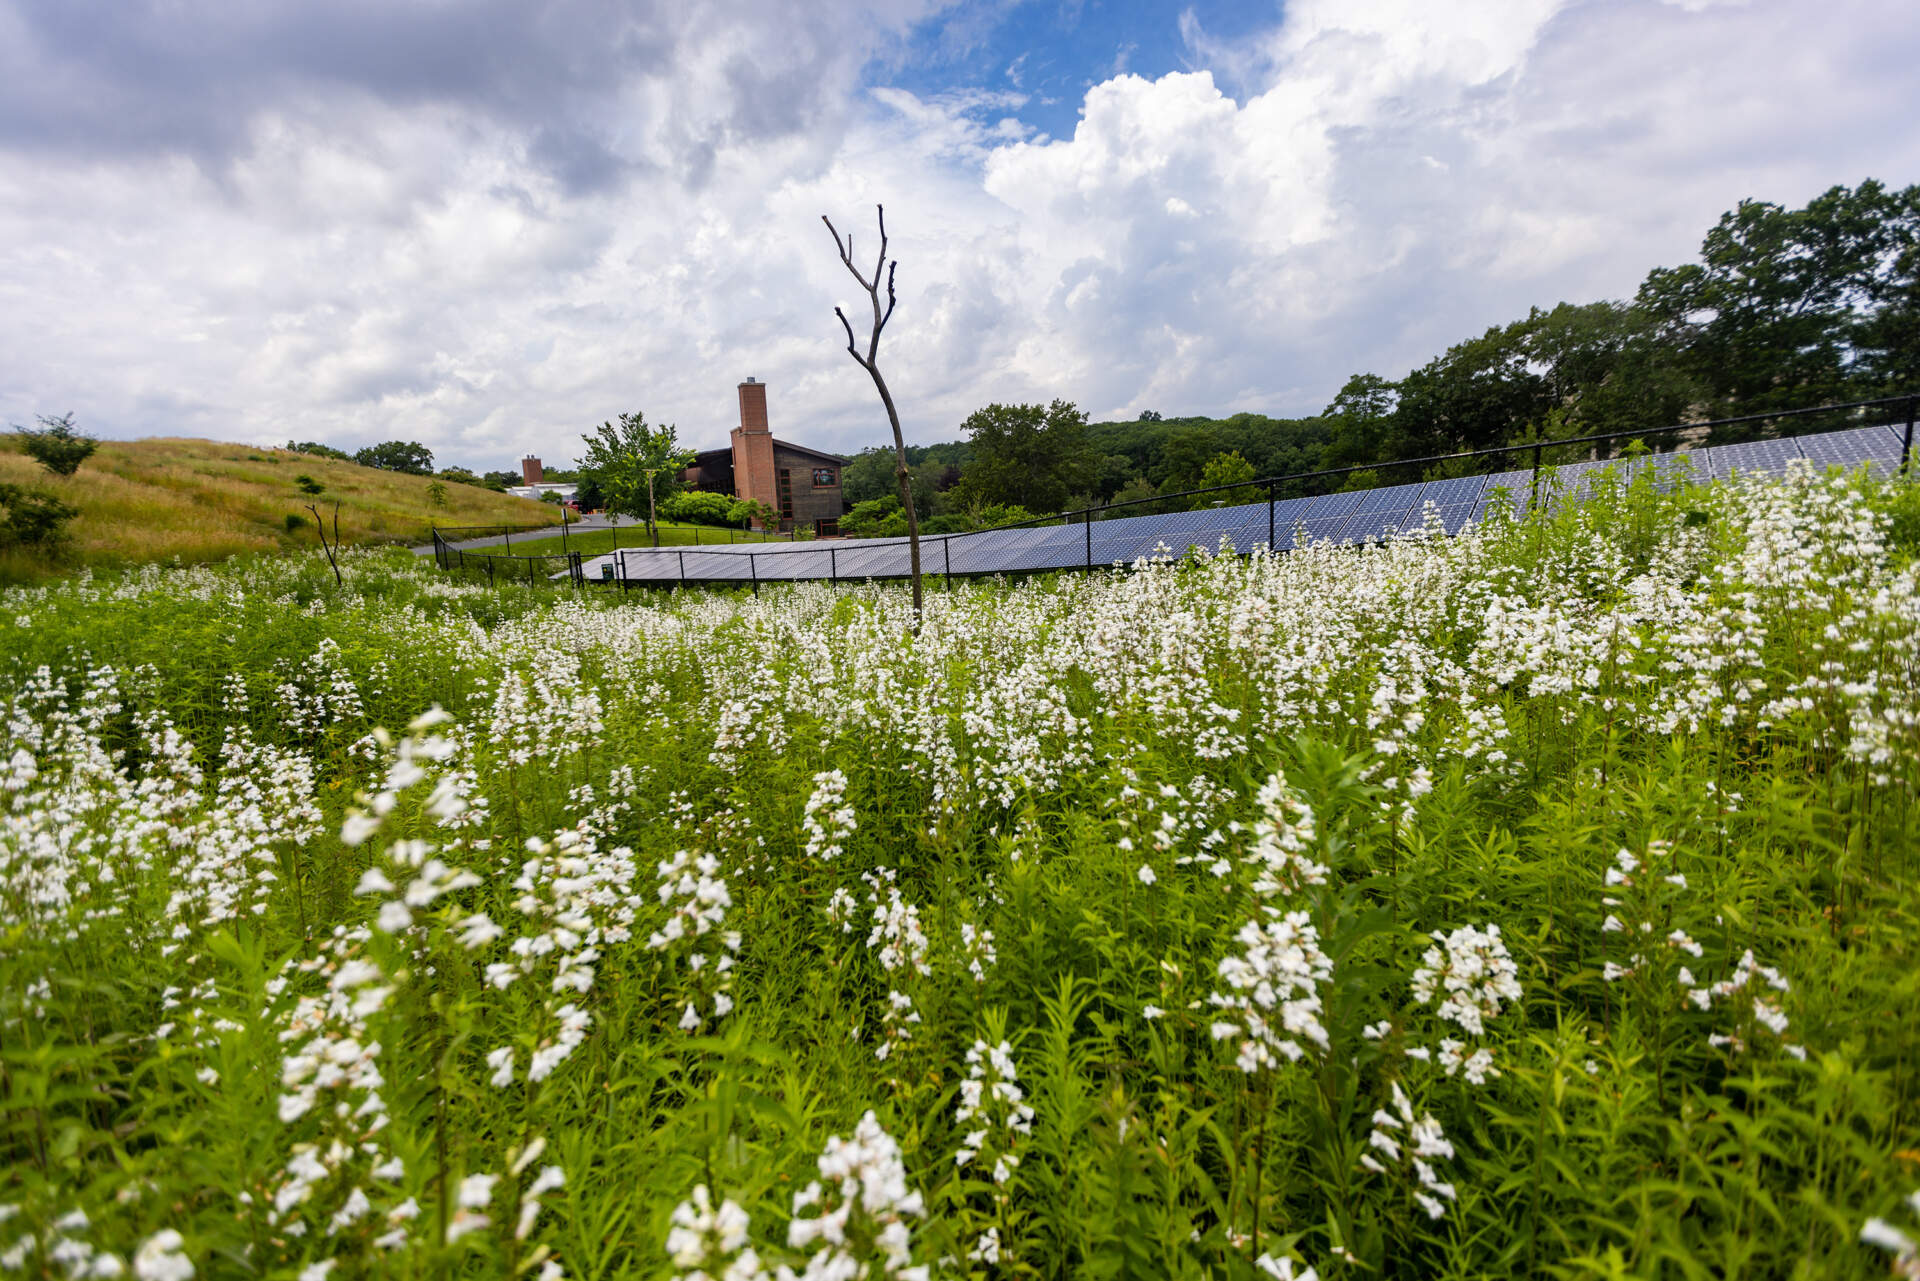 The pollinator garden blooming with foxglove beardtongue at the Weld Hill Research Building of the Arnold Arboretum. (Jesse Costa/WBUR)